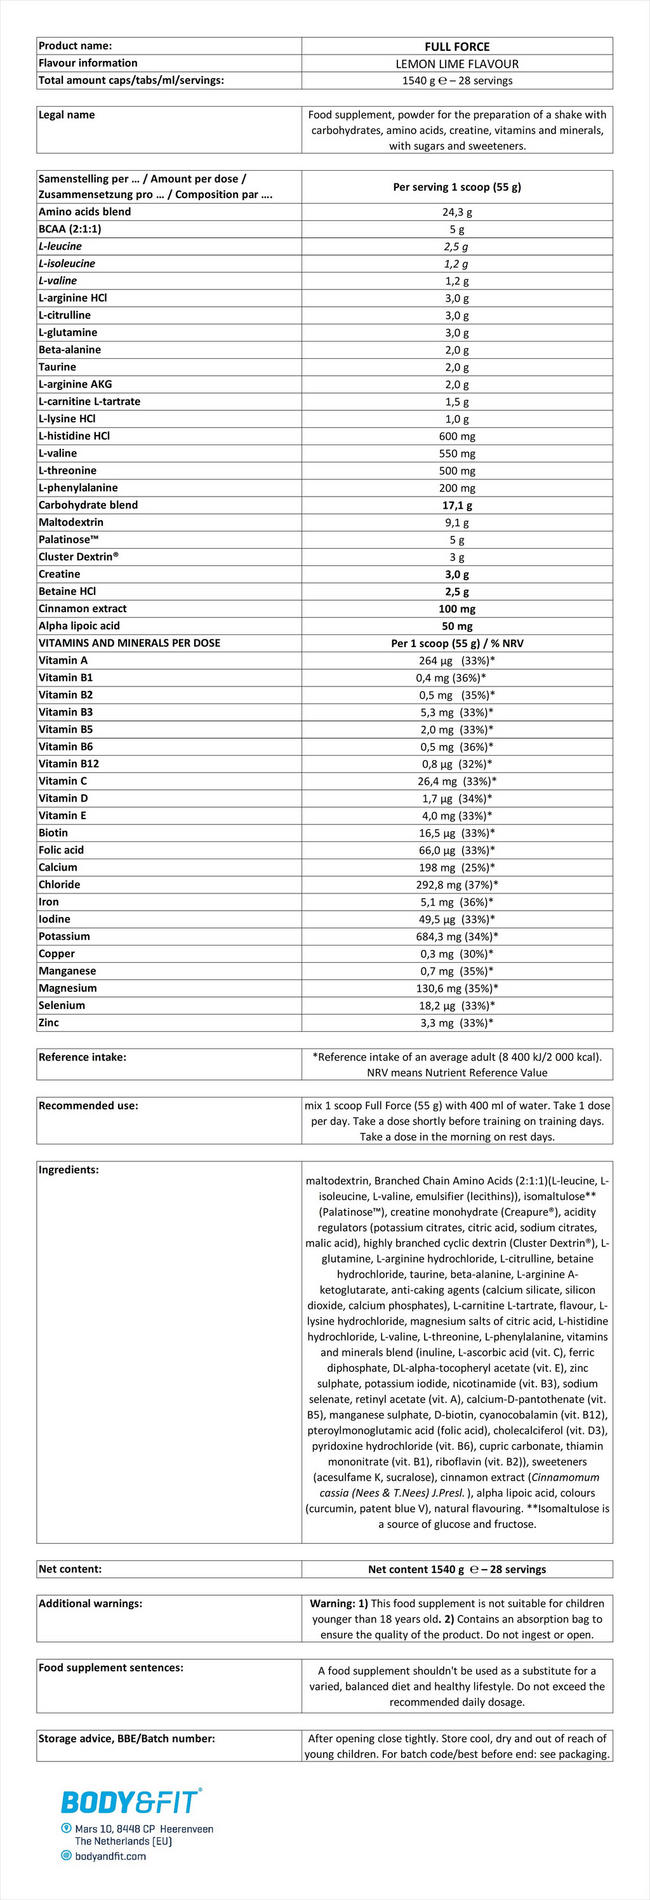 Full Force Nutritional Information 1